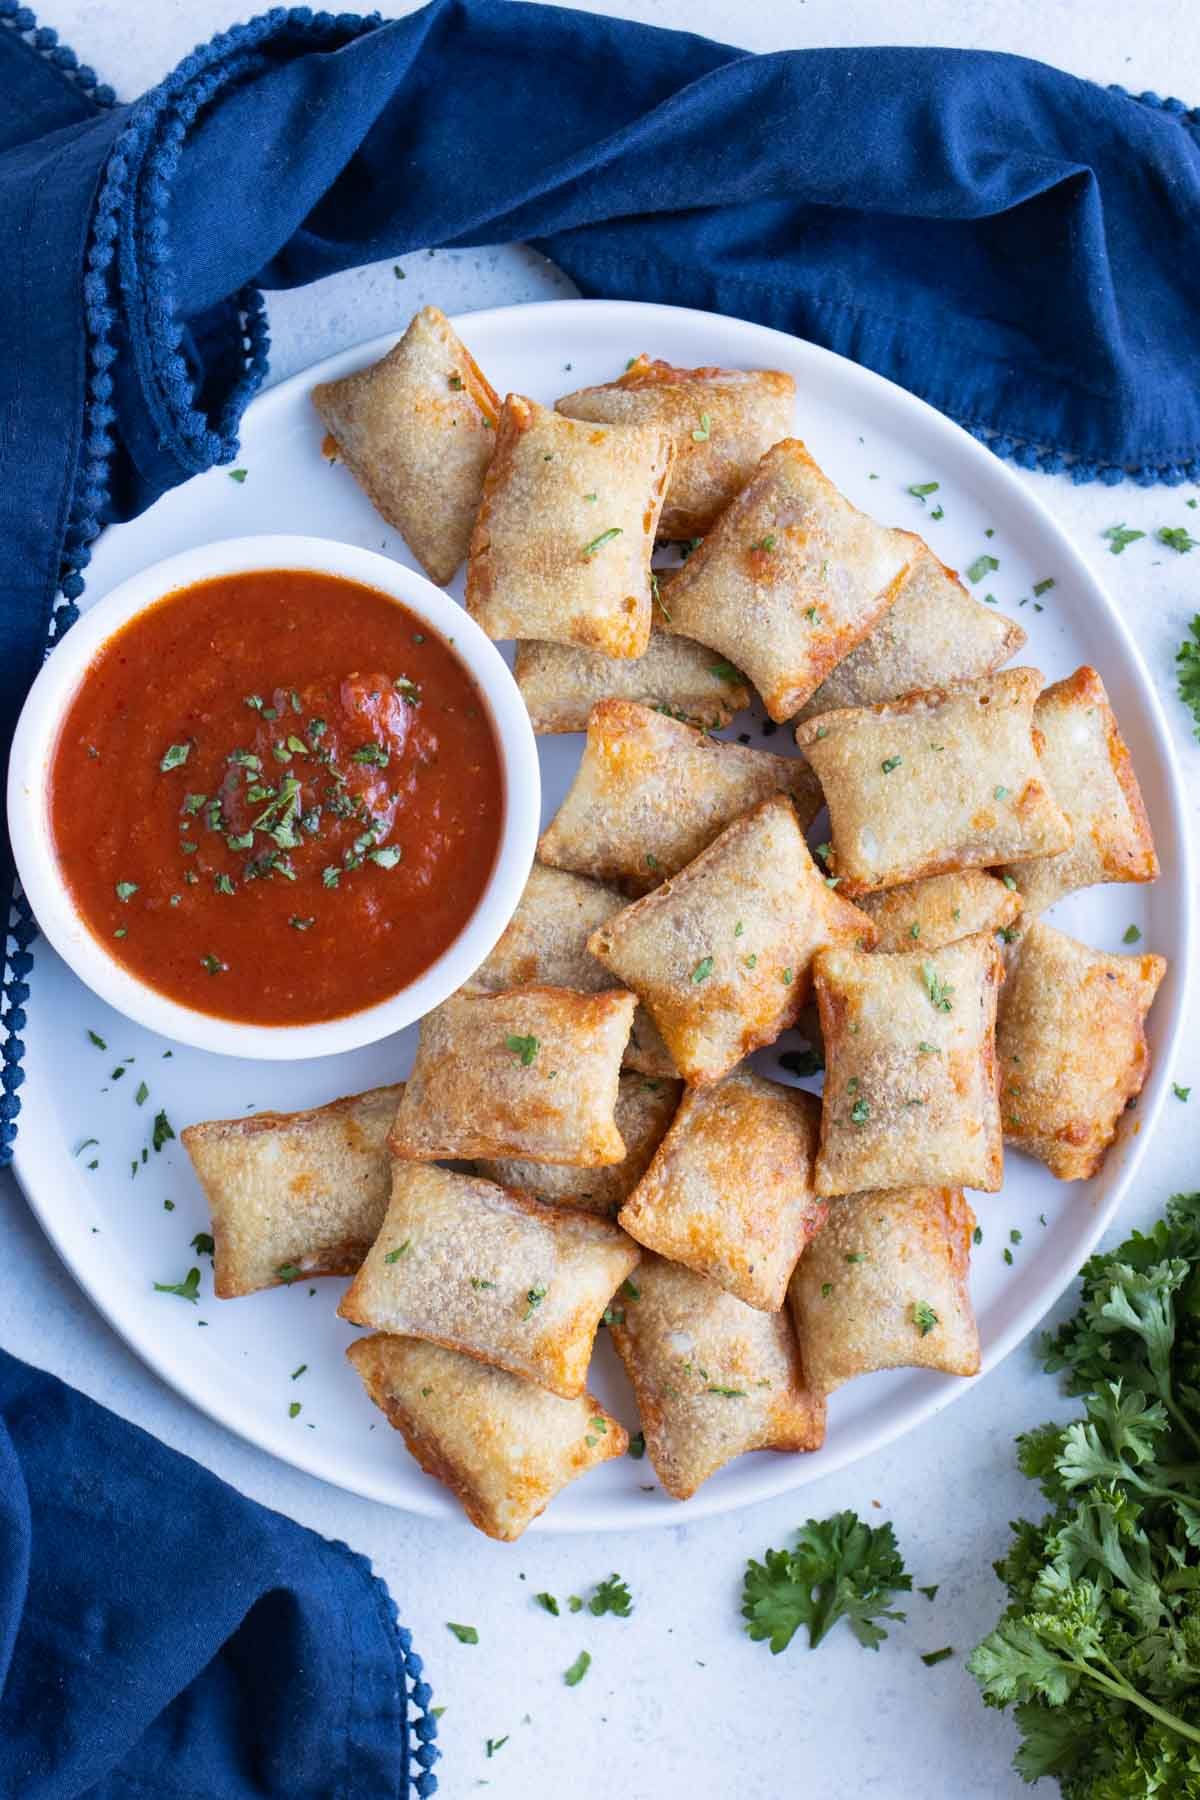 Pizza rolls are served on a white plate with a bowl of marinara sauce.